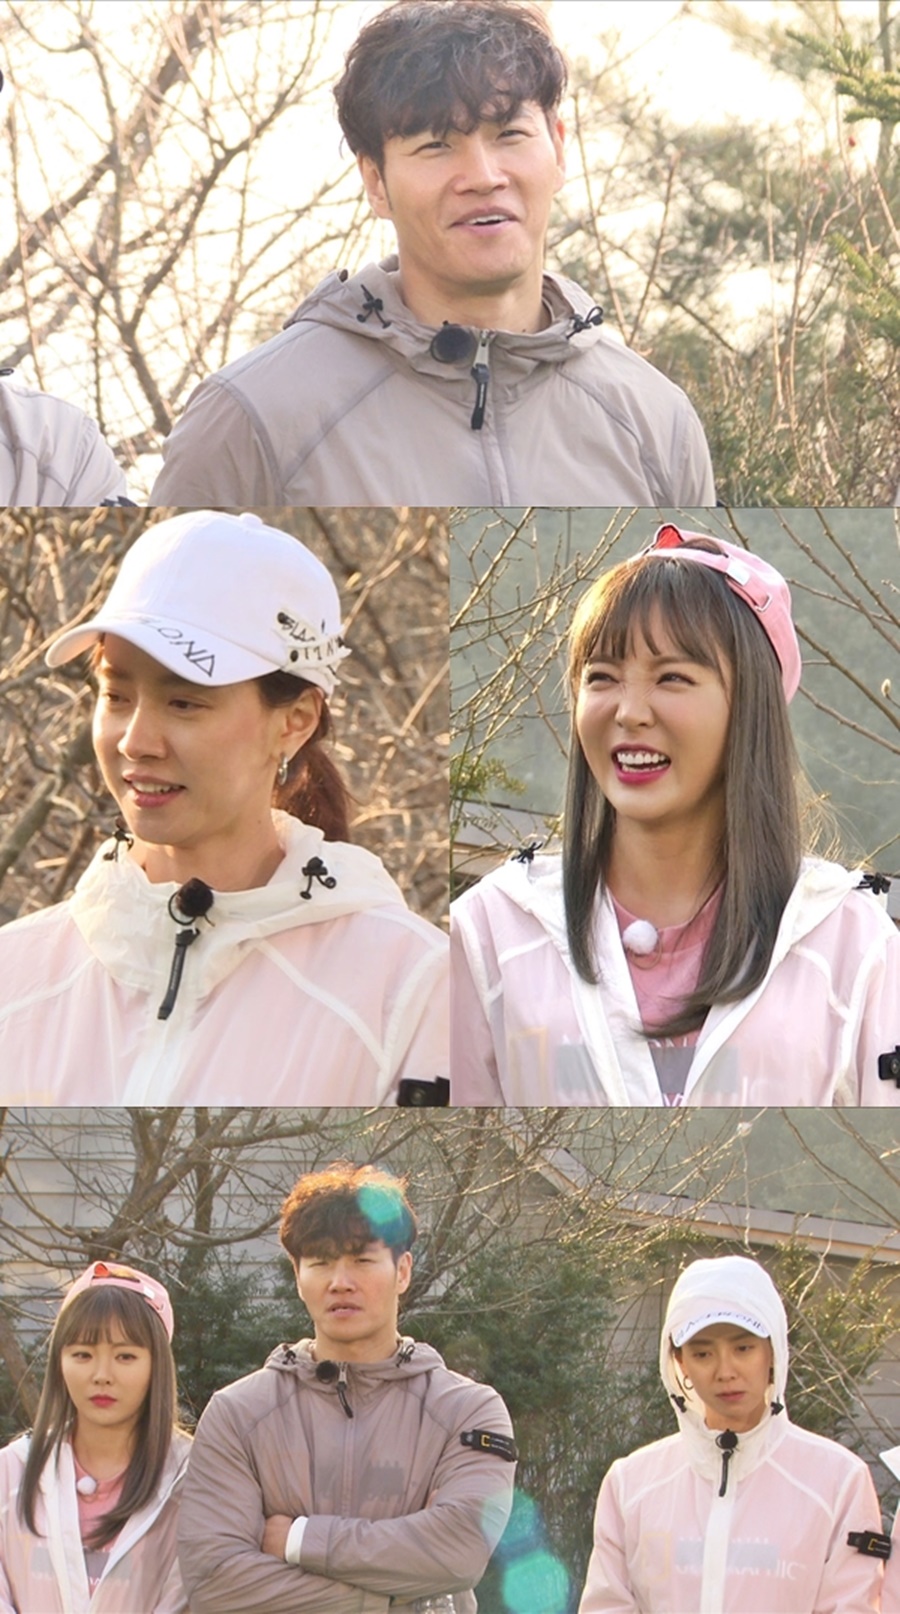 Interest in Choices of Running Man Kim Jong-kook gathersOn SBS Running Man broadcasted on the 10th, Song Ji-hyo, who collected topics as honey couple, and Kim Jong-kook, who has to play Choices between Hong Jin-young, who shines in Best Couple Award, are drawn.Kim Jong-kook has been given a couple mission.Between New Love Line Song Ji-hyo, who will be the Monday Couple, and Best Couple Hong Jin-young, who was supported by viewers at the time of Family Project, Kim Jong-kook was placed on the Choices Giro and filled the scene with tense tension.Kim Jong-kook, Song Ji-hyo, and Hong Jin-young have attracted a lot of attention by showing Hollywood-style triangles that can not be cooler in search of Hong Jin-youngs advertising shooting scene in the last broadcast.I wonder who will go to the direction of Kim Jong-kook Love Line which is on the Hwaryongjeong.SBS Running Man is broadcast every Sunday at 5 pm.